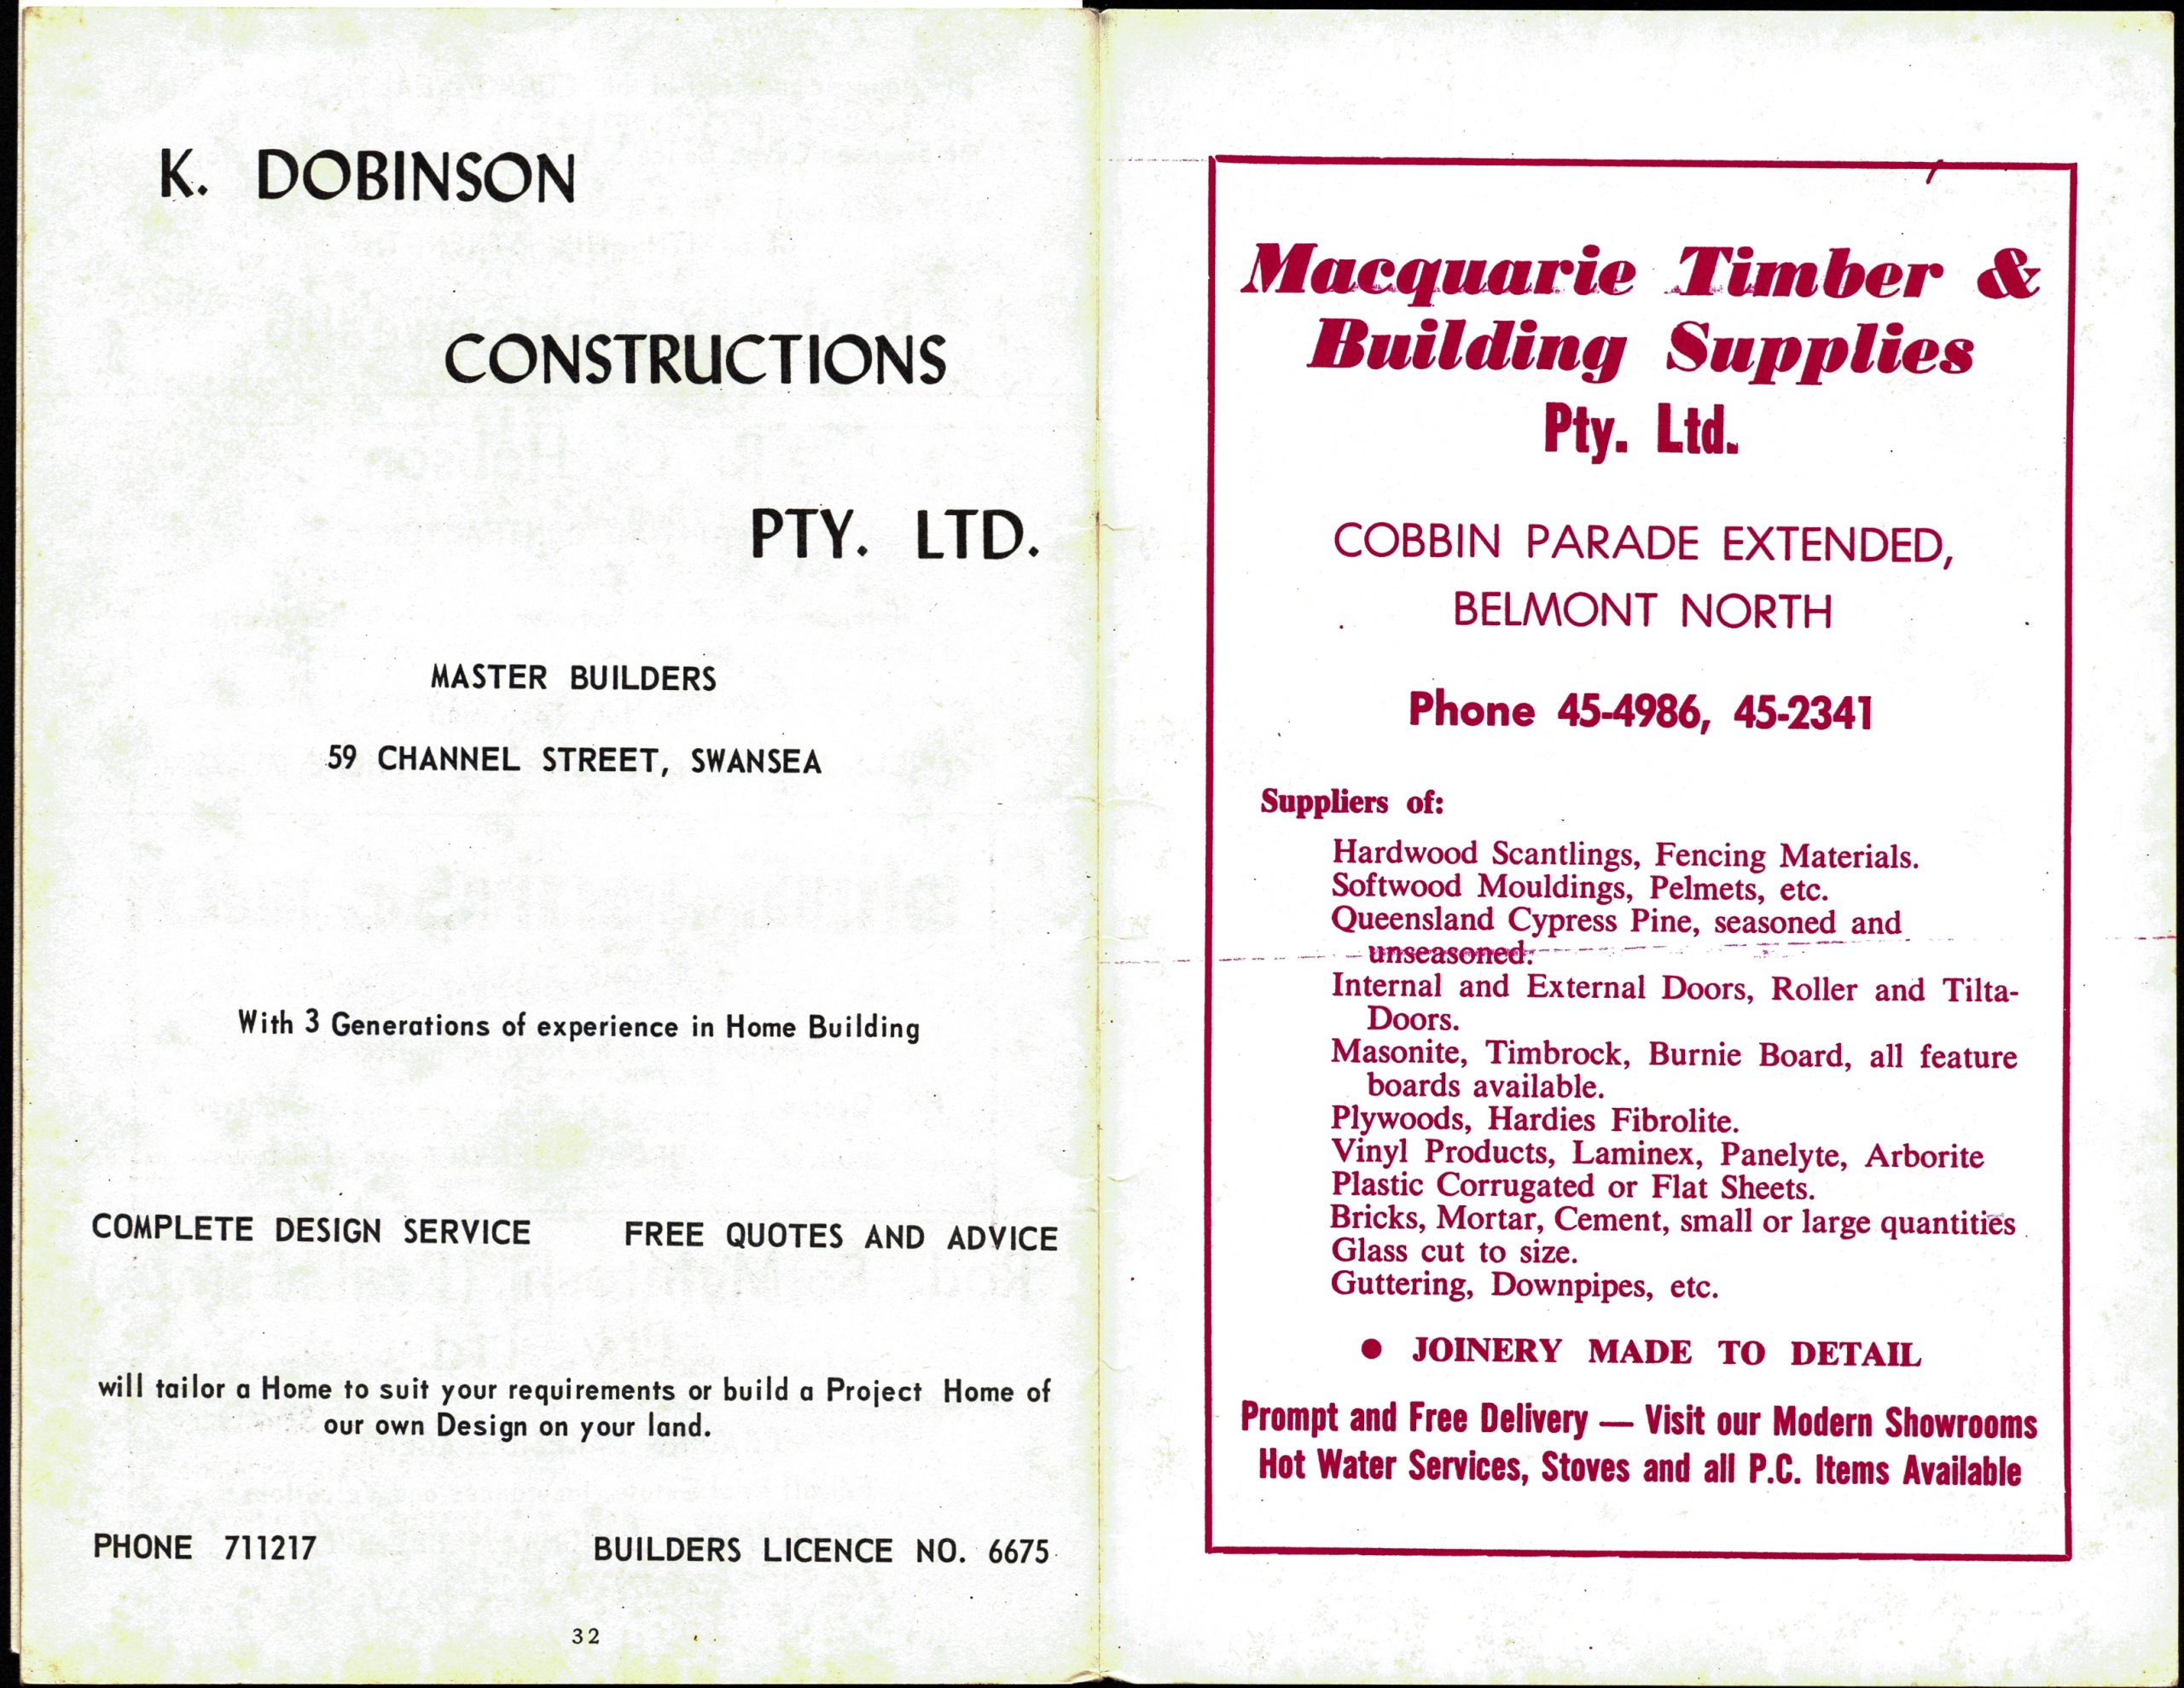 Yellowed programme pages with pink and black text advertising K. Dobindon Constructions and Macquarie Timber & Building Supplies.